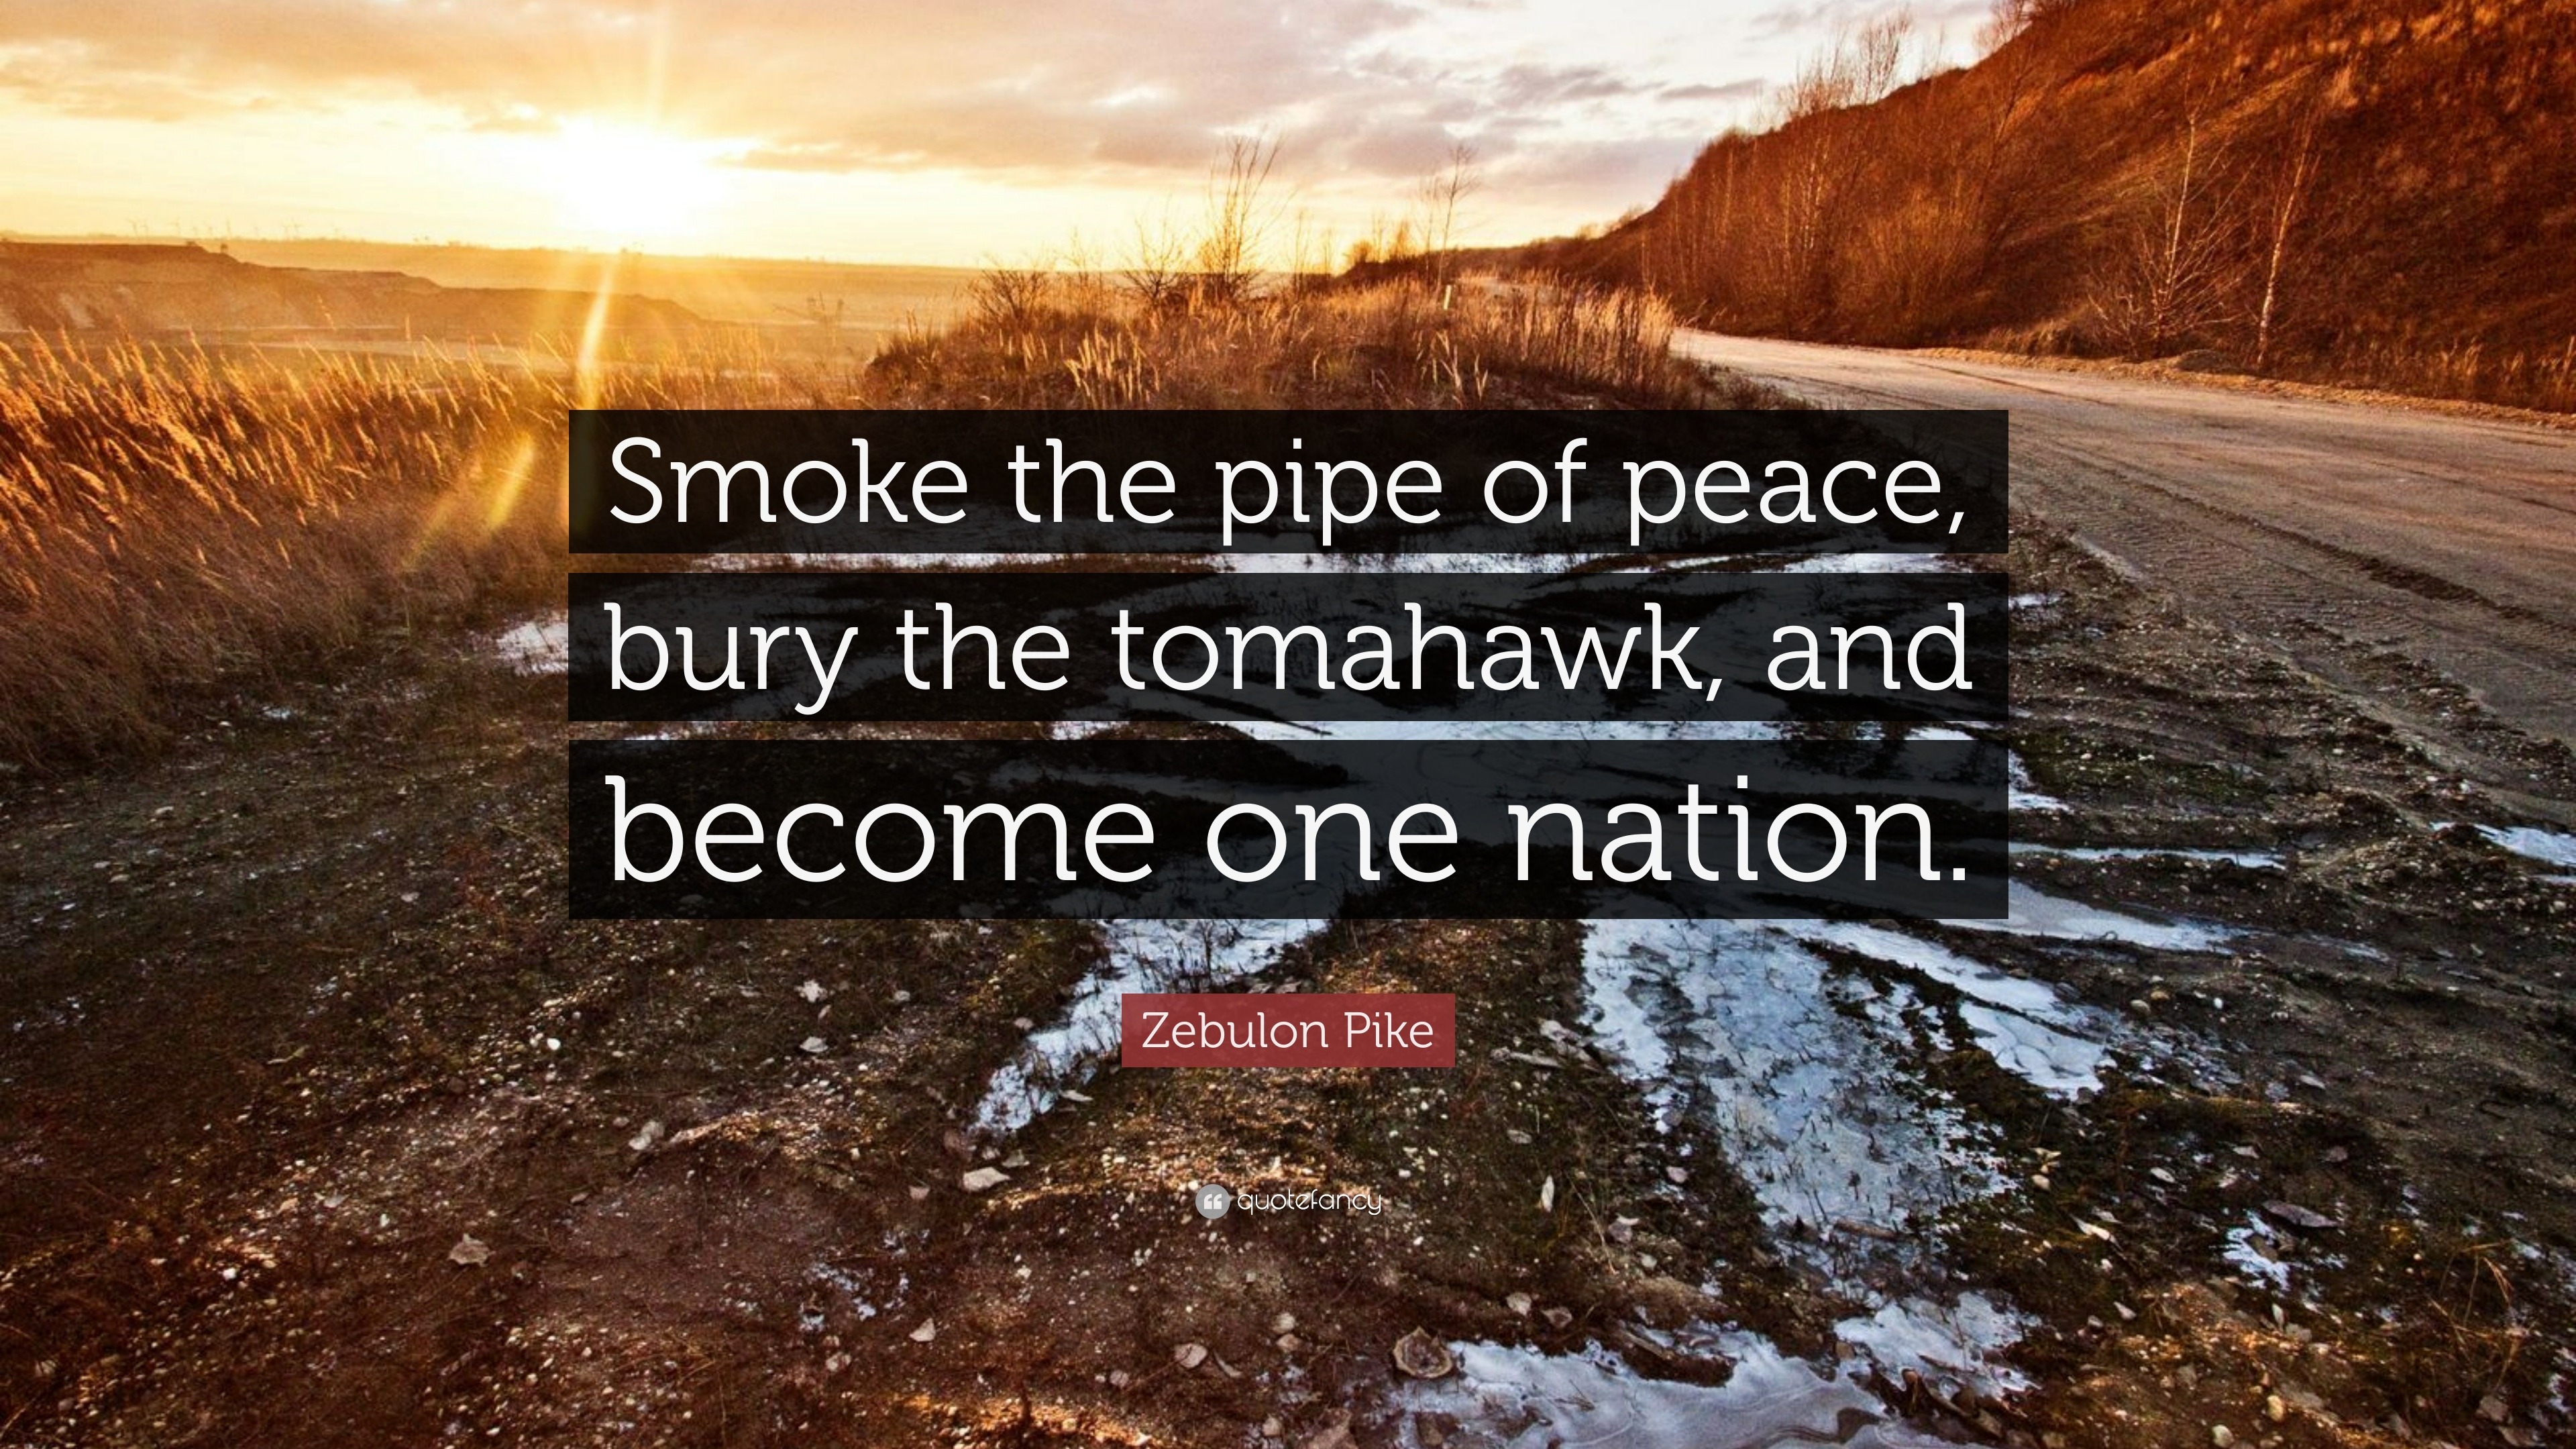 Zebulon Pike Quote Smoke The Pipe Of Peace Bury The Tomahawk And Become One Nation